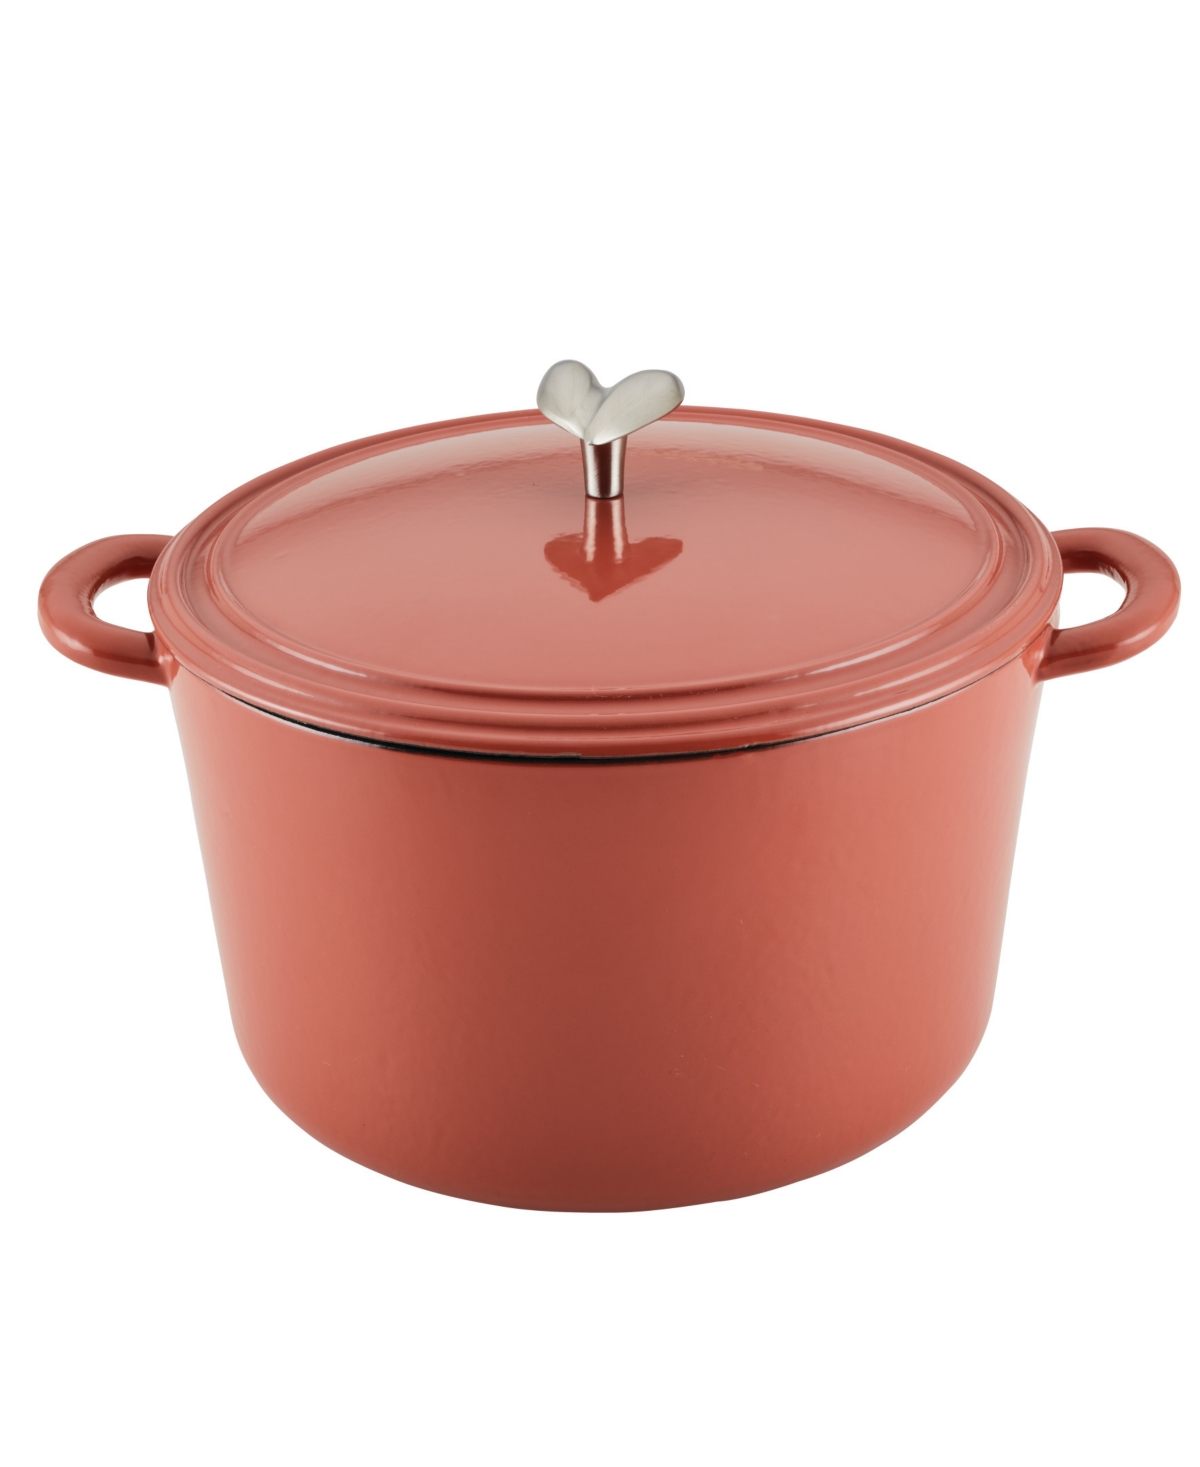 Ayesha Curry Enamelled Cast Iron 6 Quart Dutch Oven with Lid